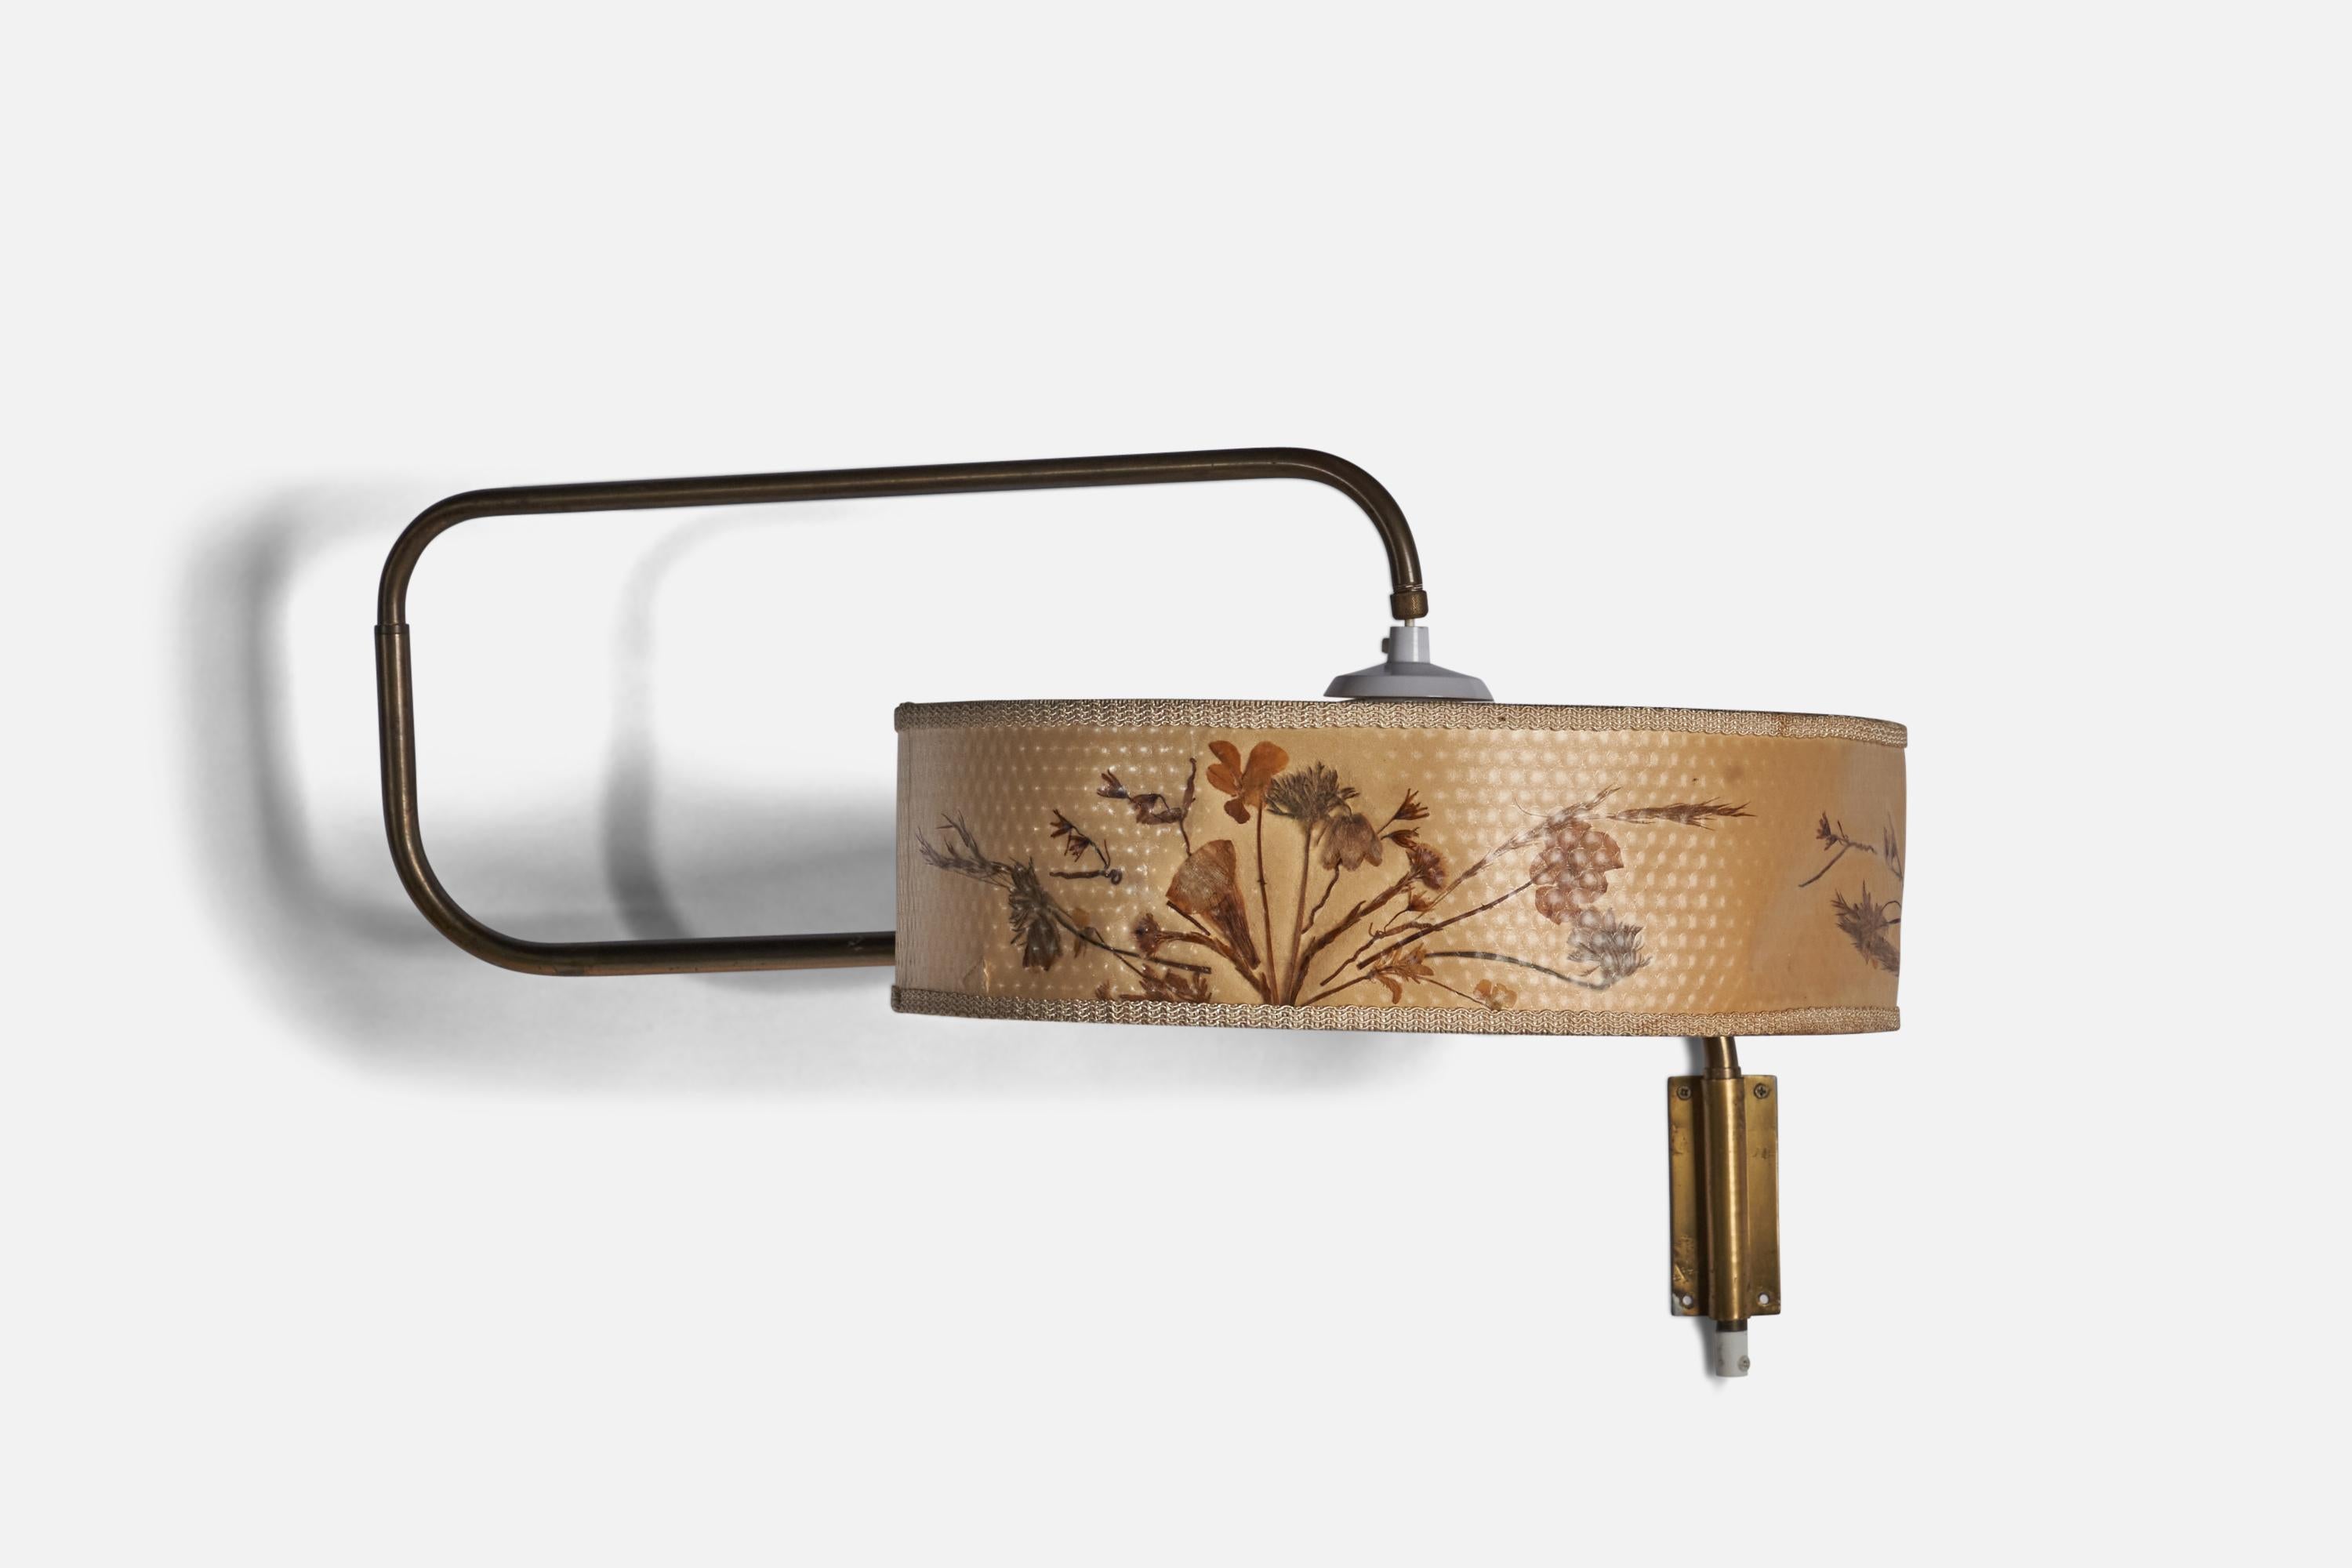 A brass, glass, and paper with laminated plants wall light designed and produced in Sweden, 1940s.

Collapsed Dimensions (inches): 15” H x 25” W x 19.5” D
Fully Extended Dimensions (inches): 15” H x 15.75” W x 51” D
Bulb Specifications: E-26